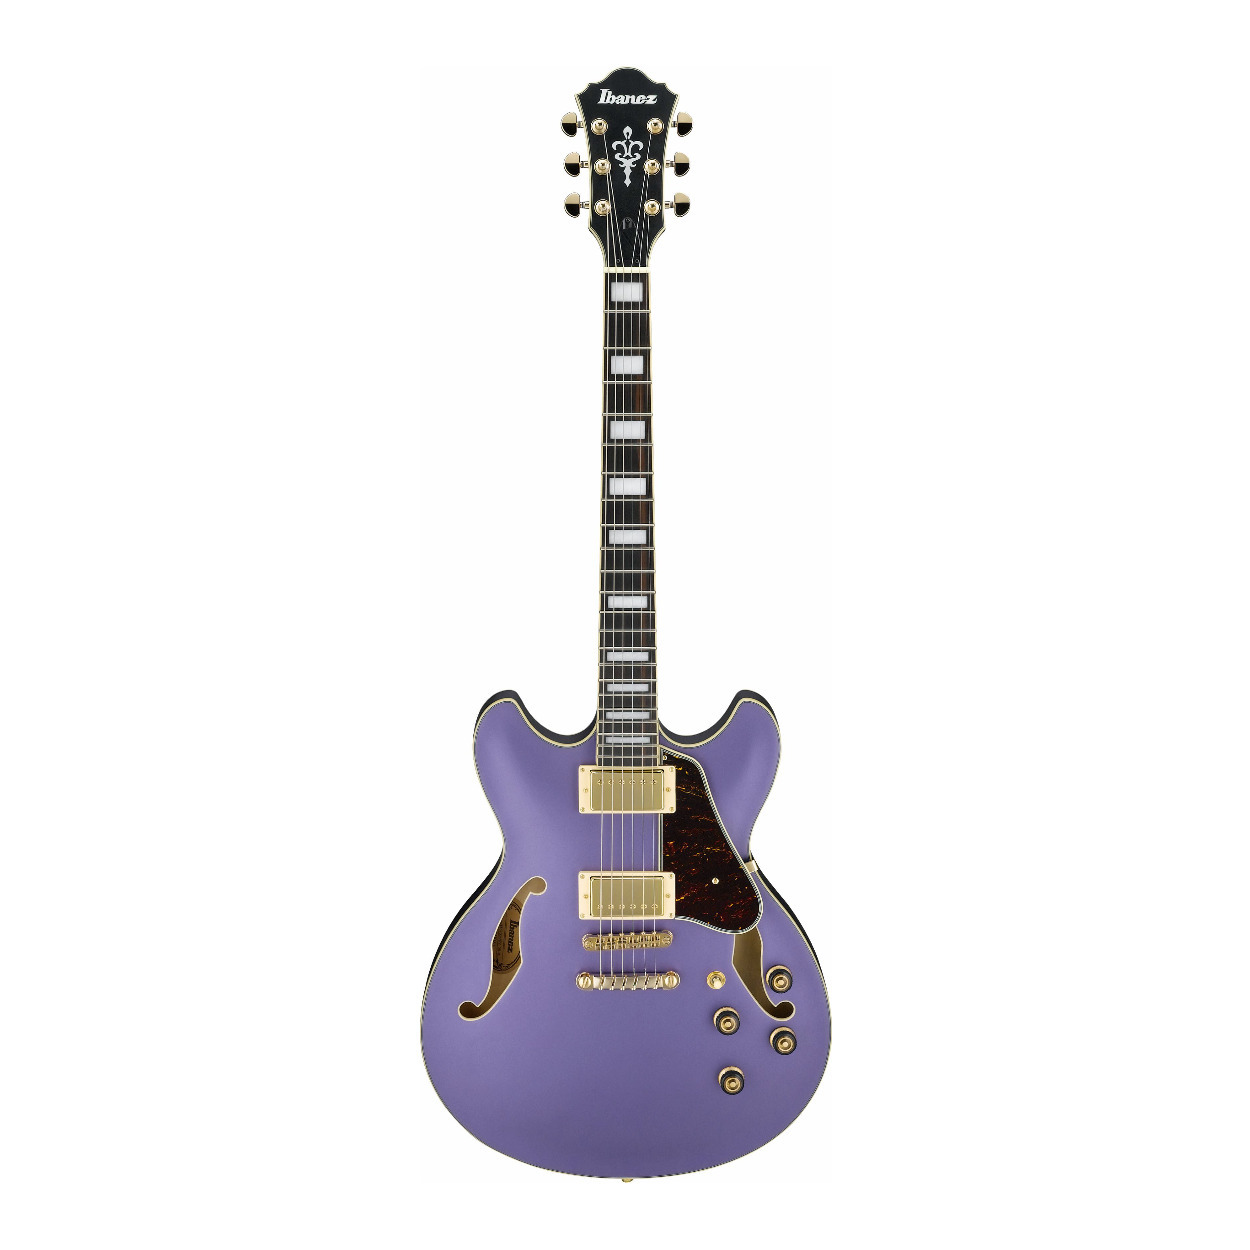 Ibanez AS Artcore 6-String Semi-Hollow Body Electric Guitar (Metallic Purple Flat, Right-Handed) -  AS73GMPF